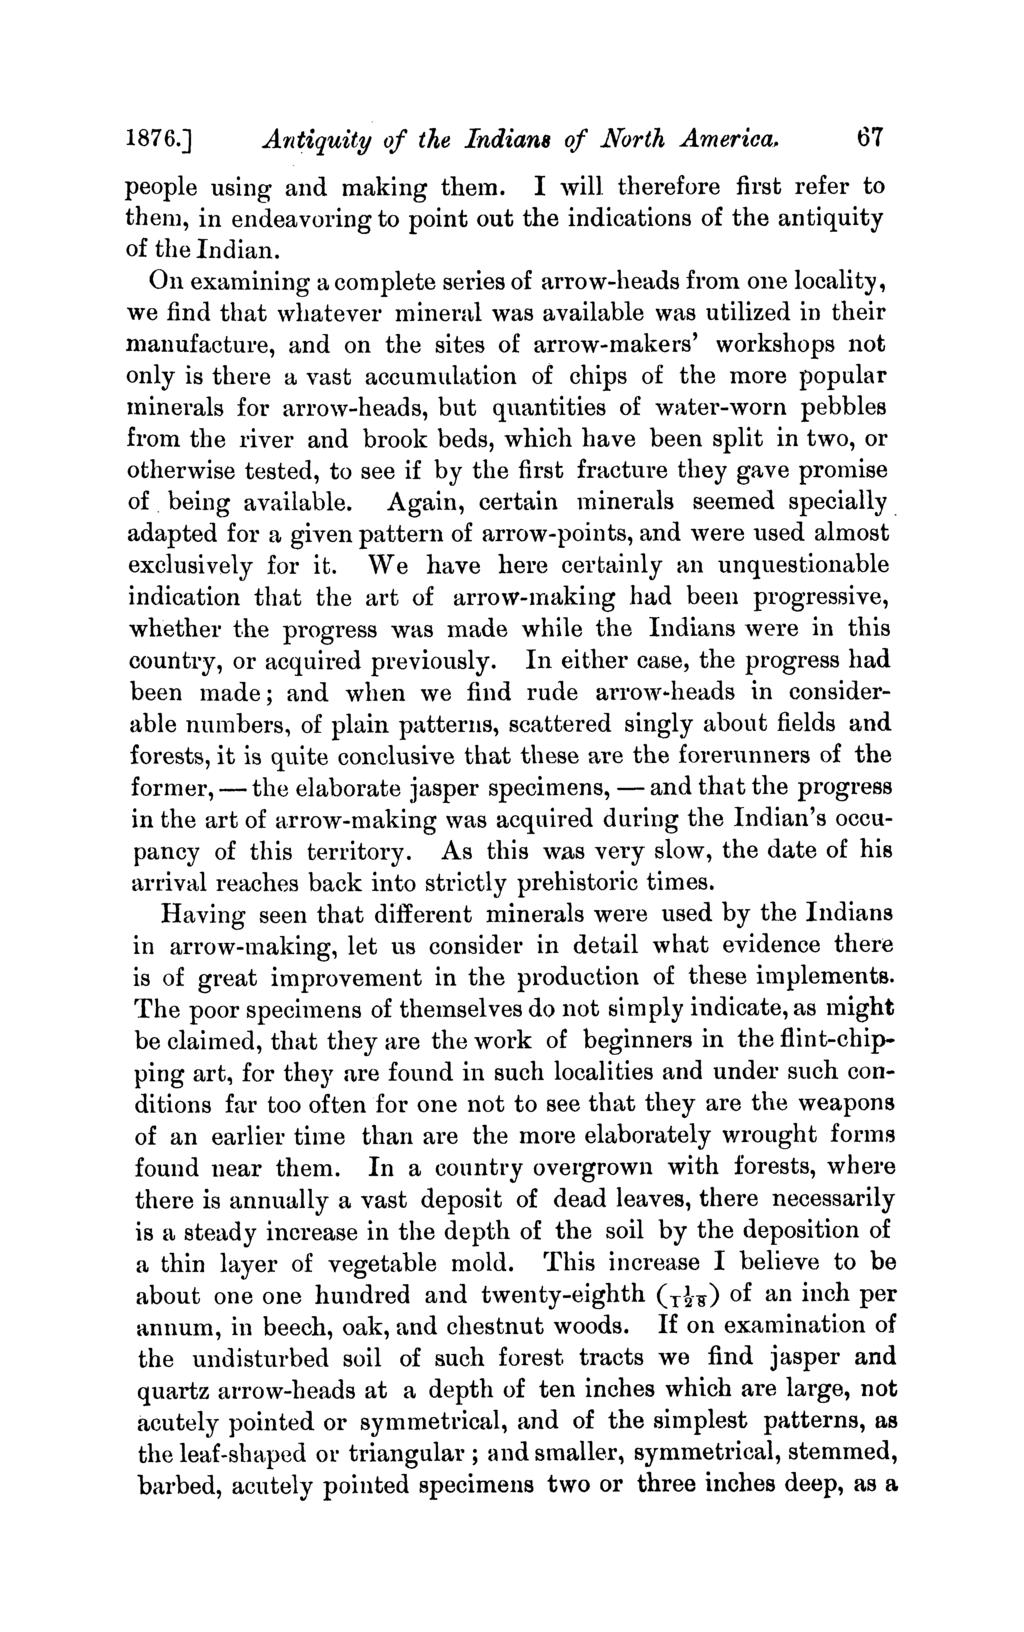 1876.] Antiquity of the Indians of North America, 67 people using and making them. I will therefore first refer to then, in endeavoring to point out the indications of the antiquity of the Indian.